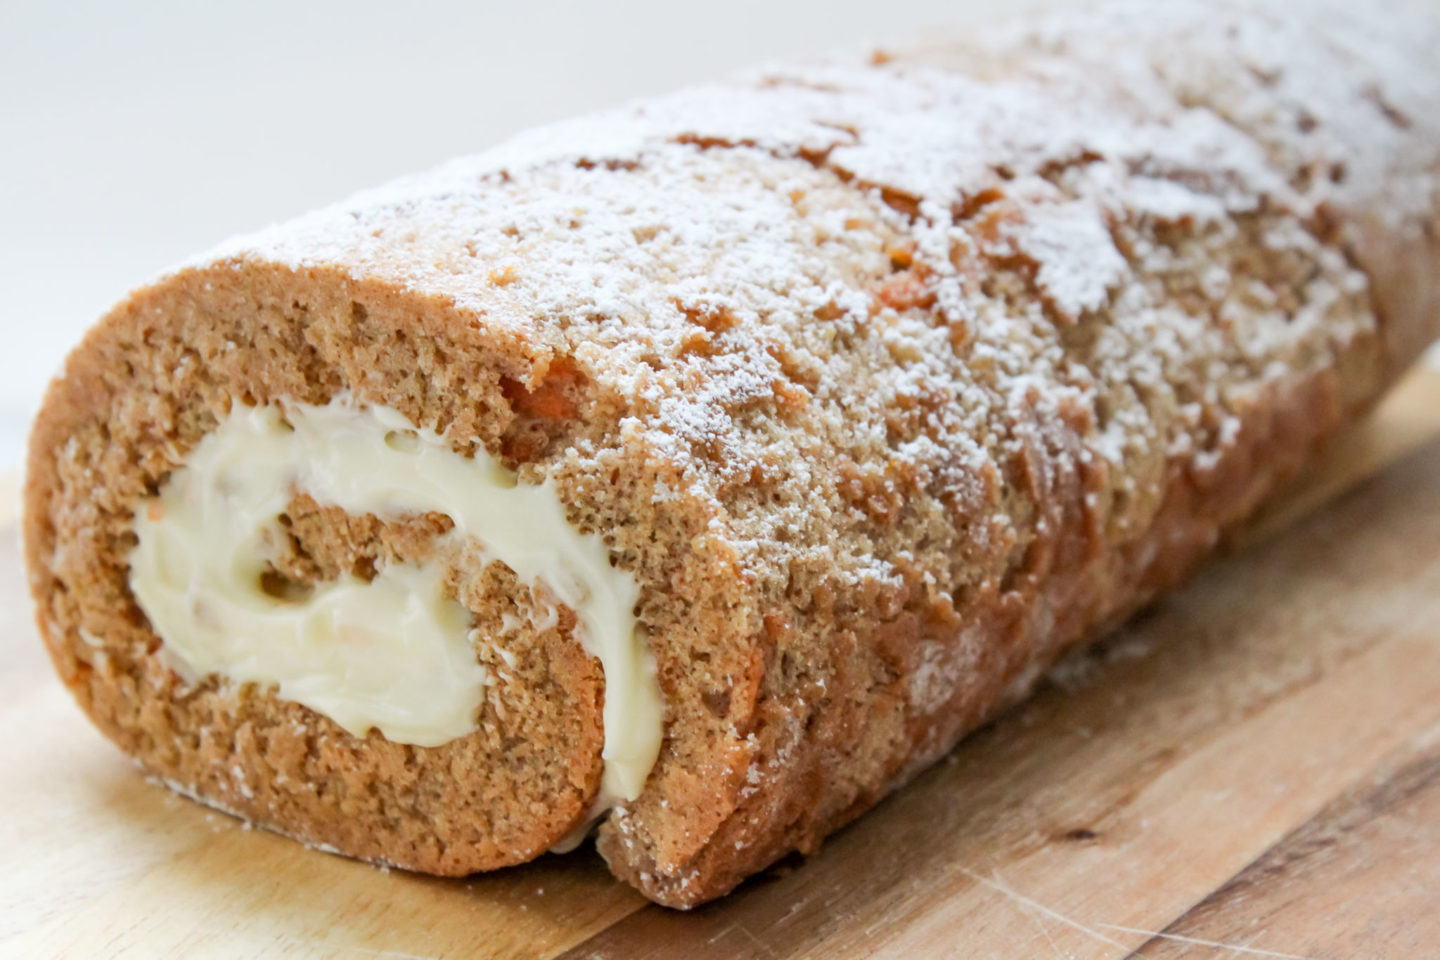 Carrot cake Swiss roll with cream cheese icing/frosting